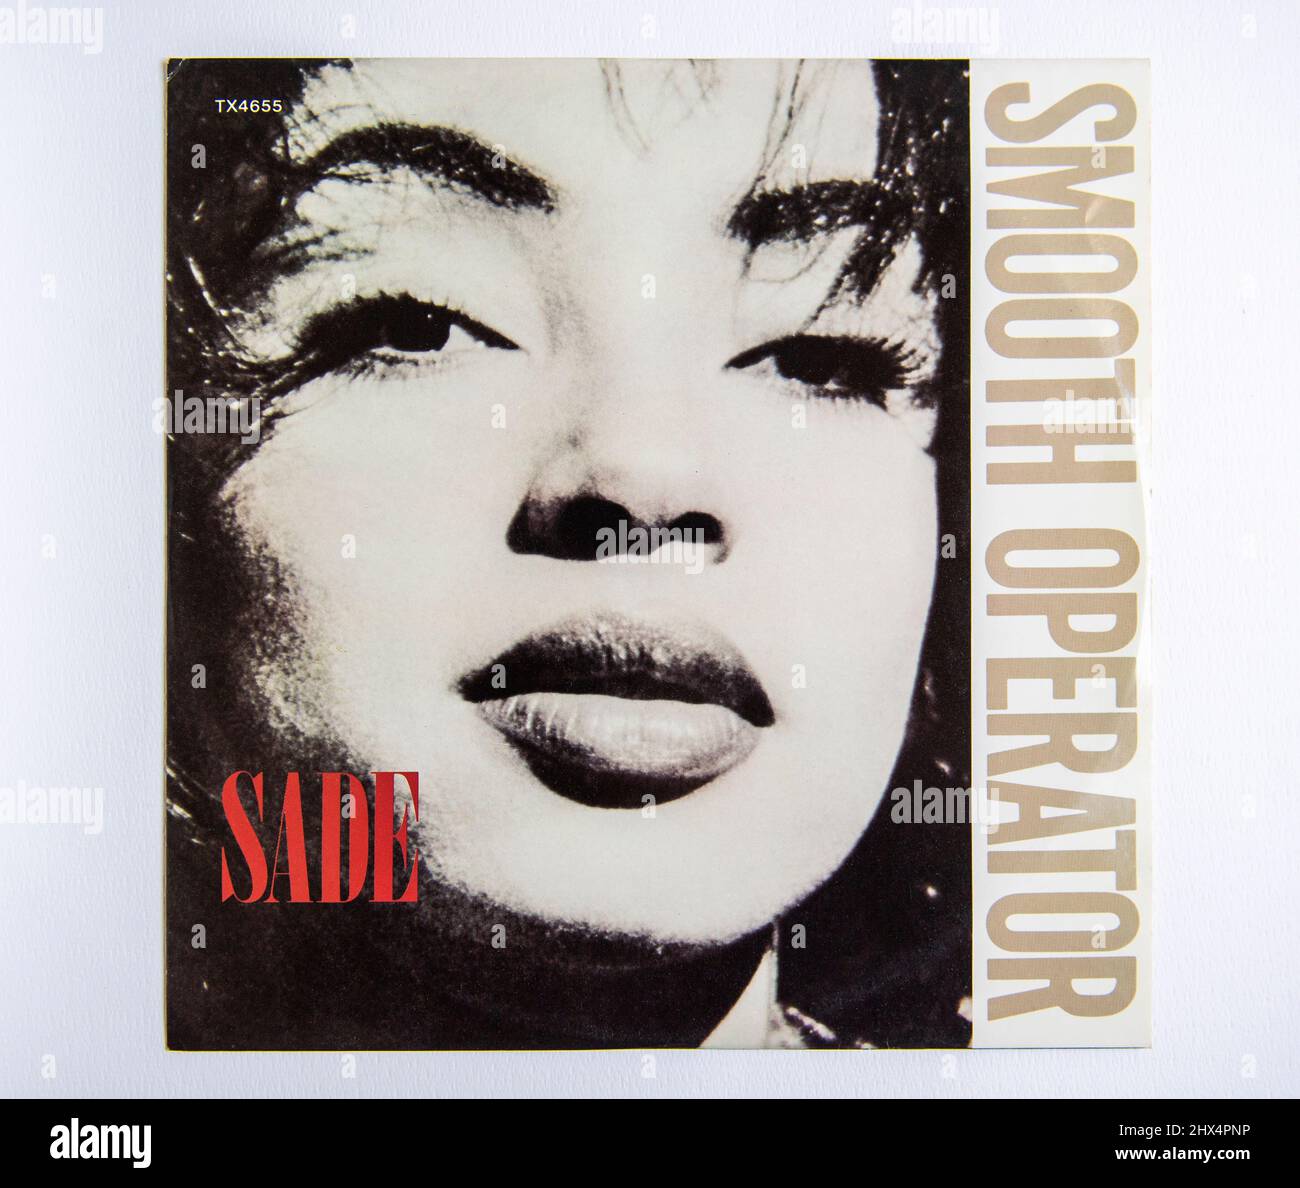 Picture cover of the 12 inch single version of Smooth Operator by